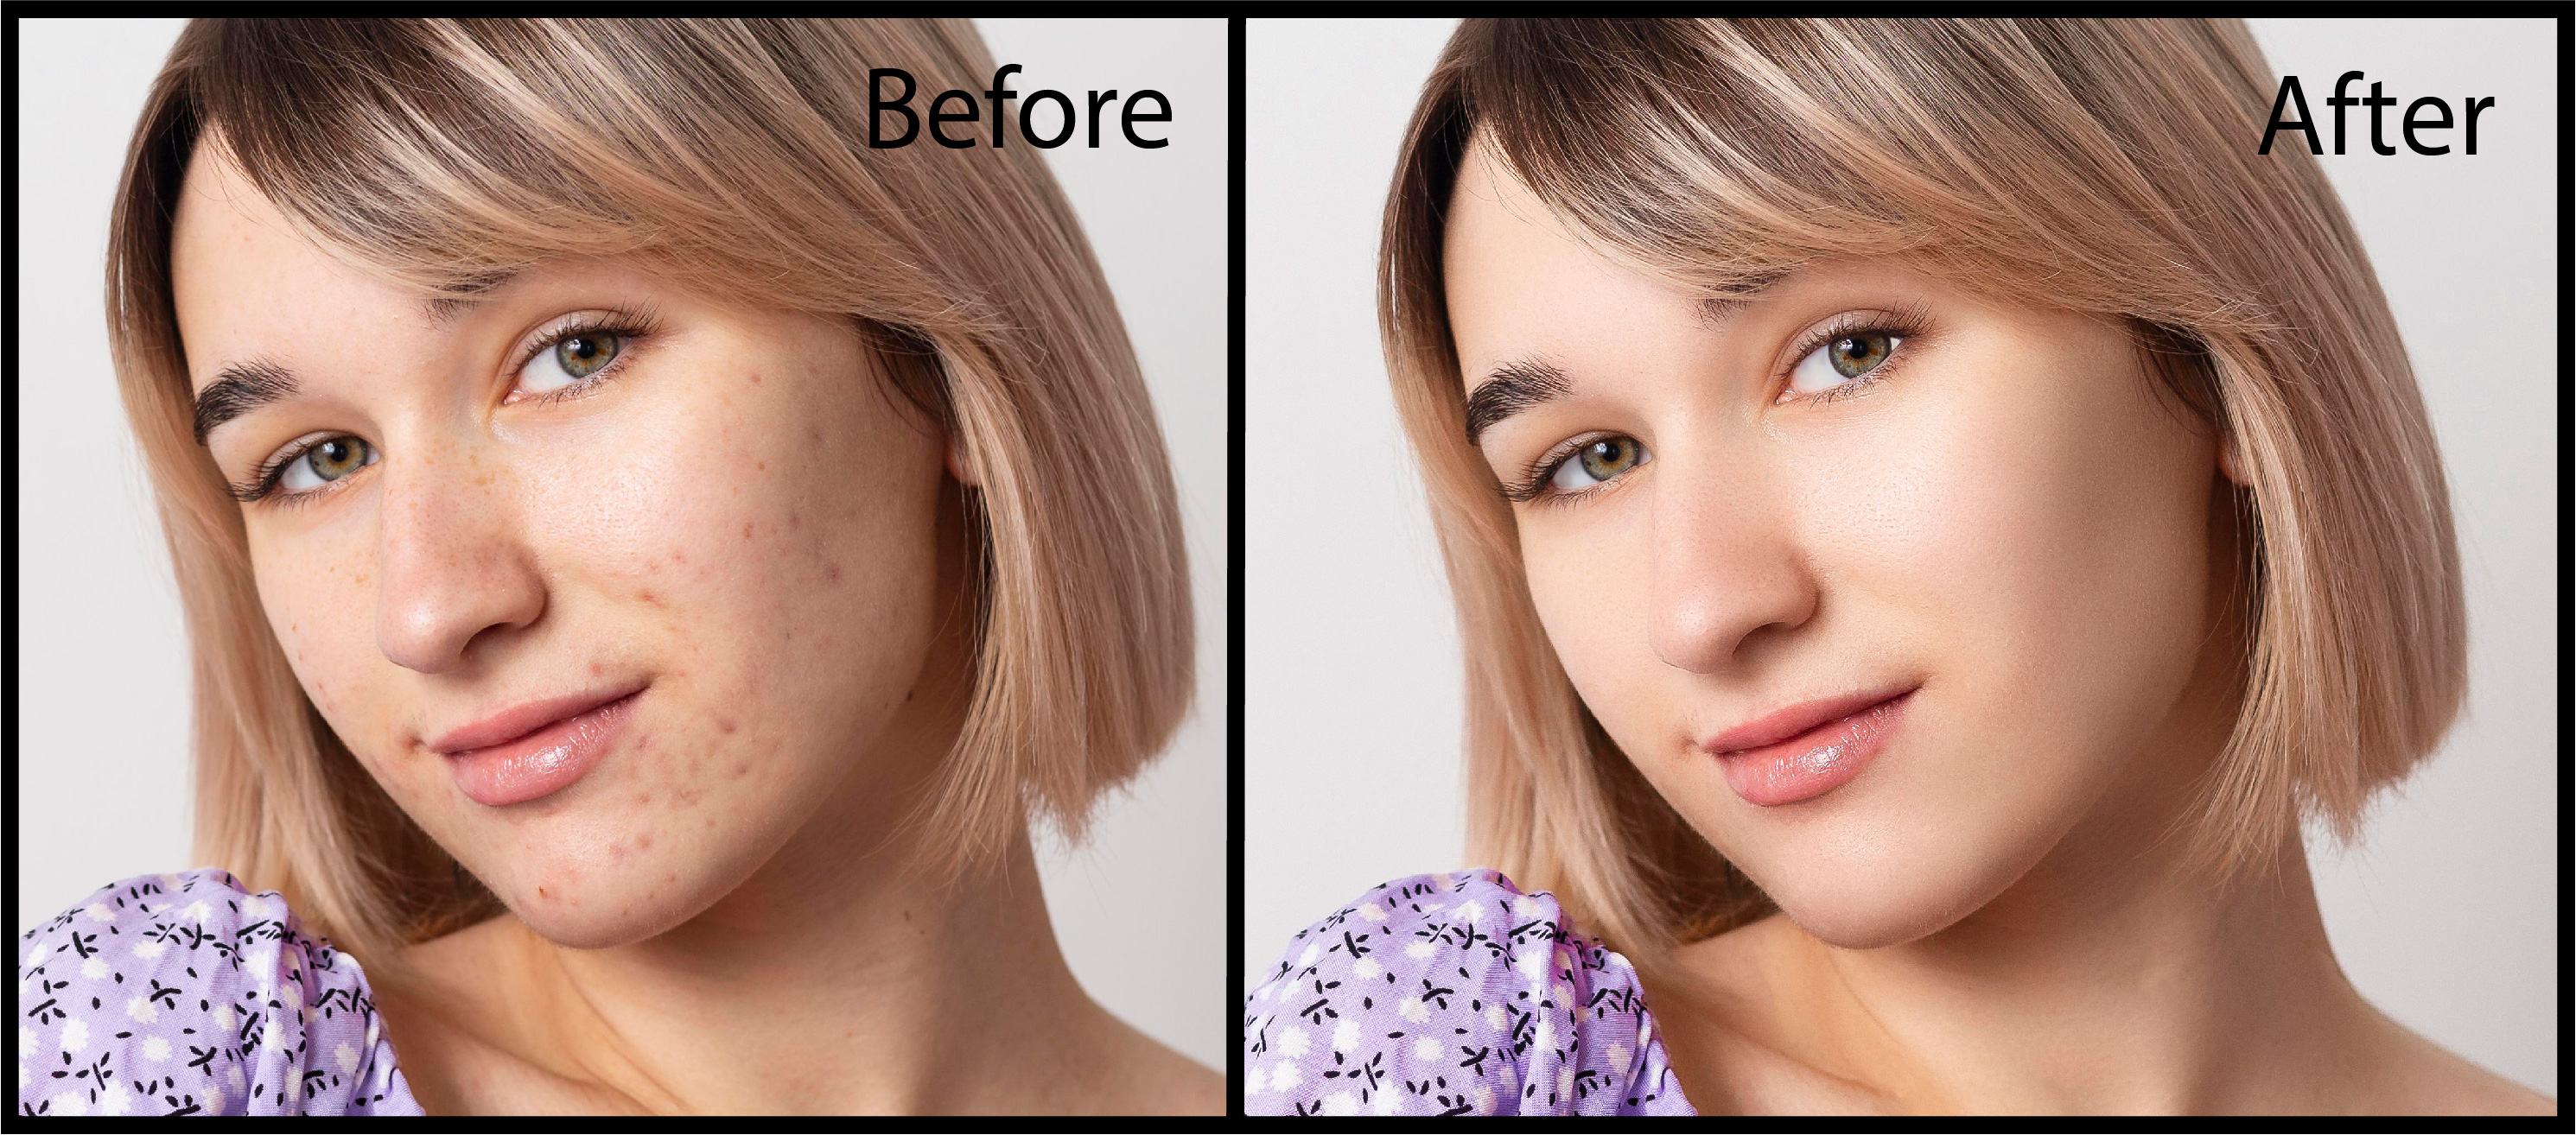 I will do professional Photo Retouch and editing with in one day